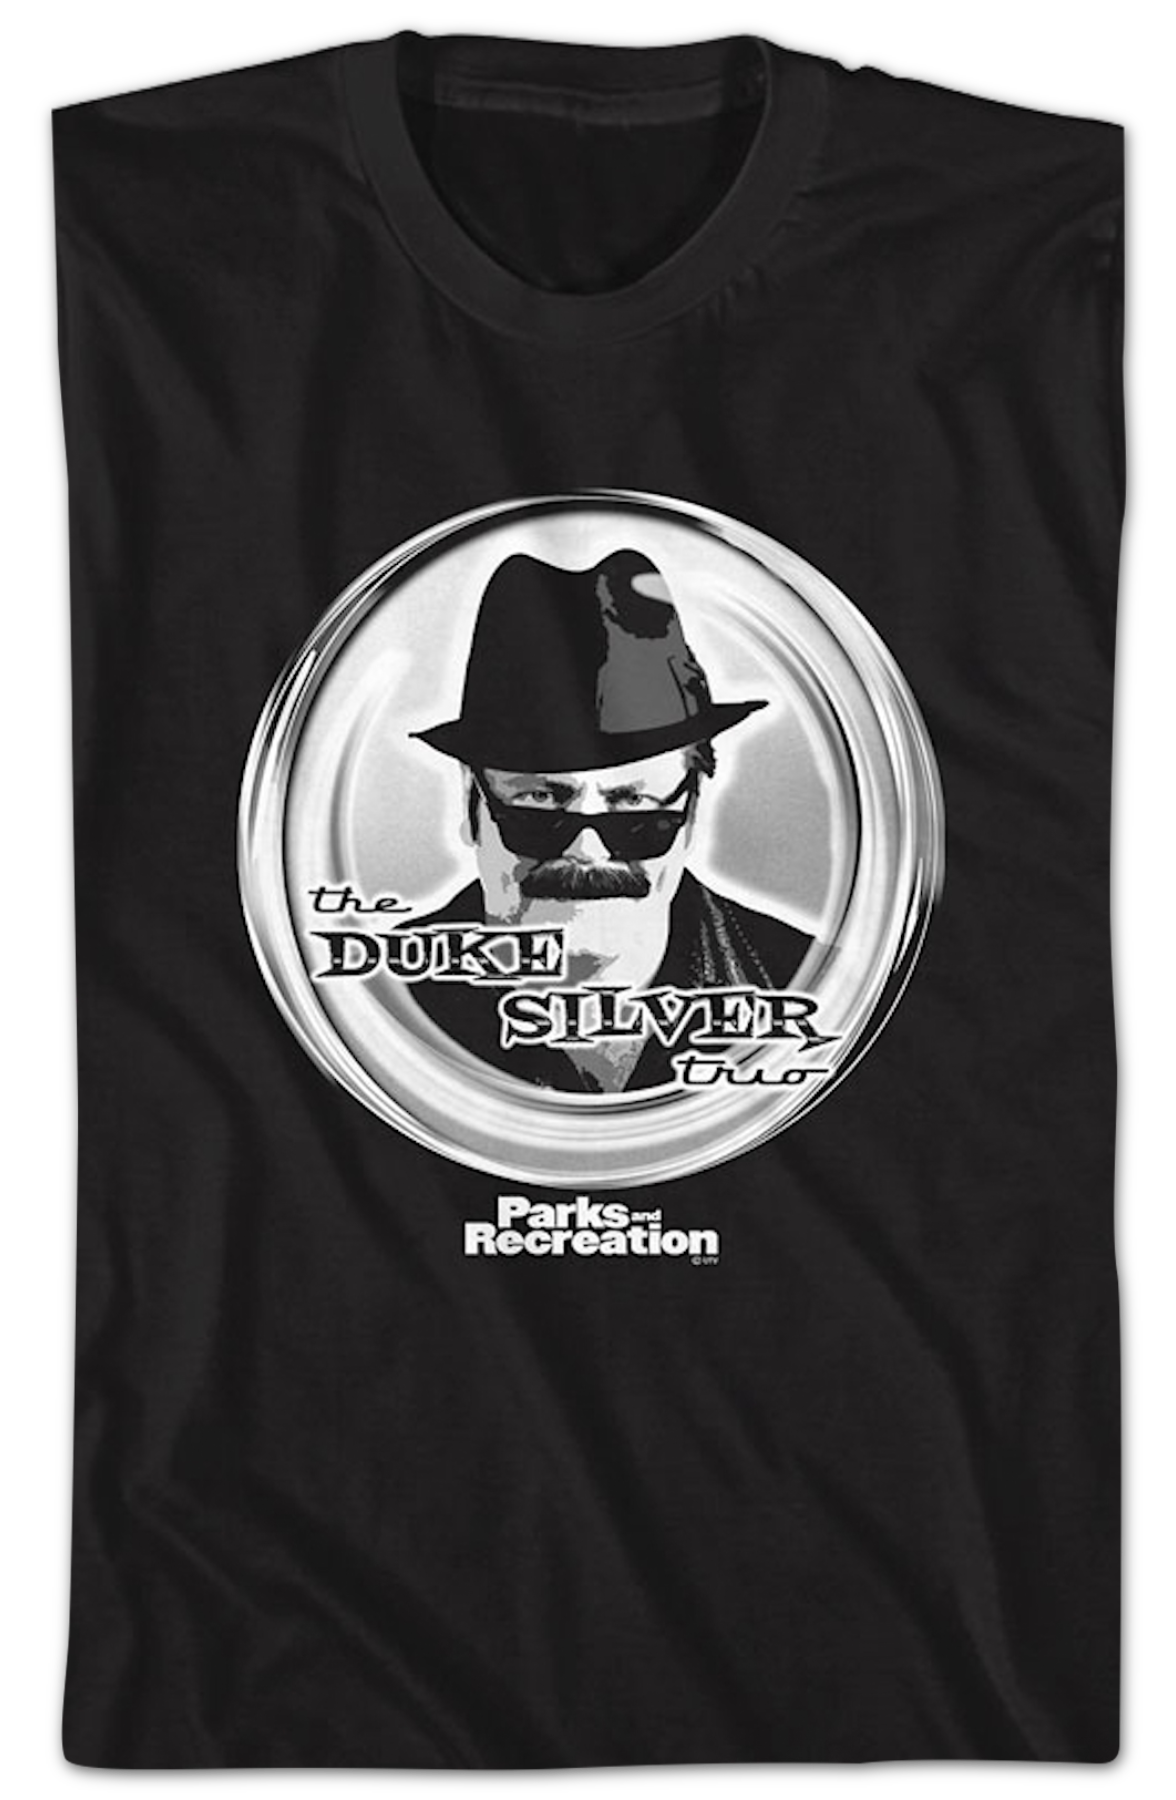 The Duke Silver Trio Parks and Recreation T-Shirt